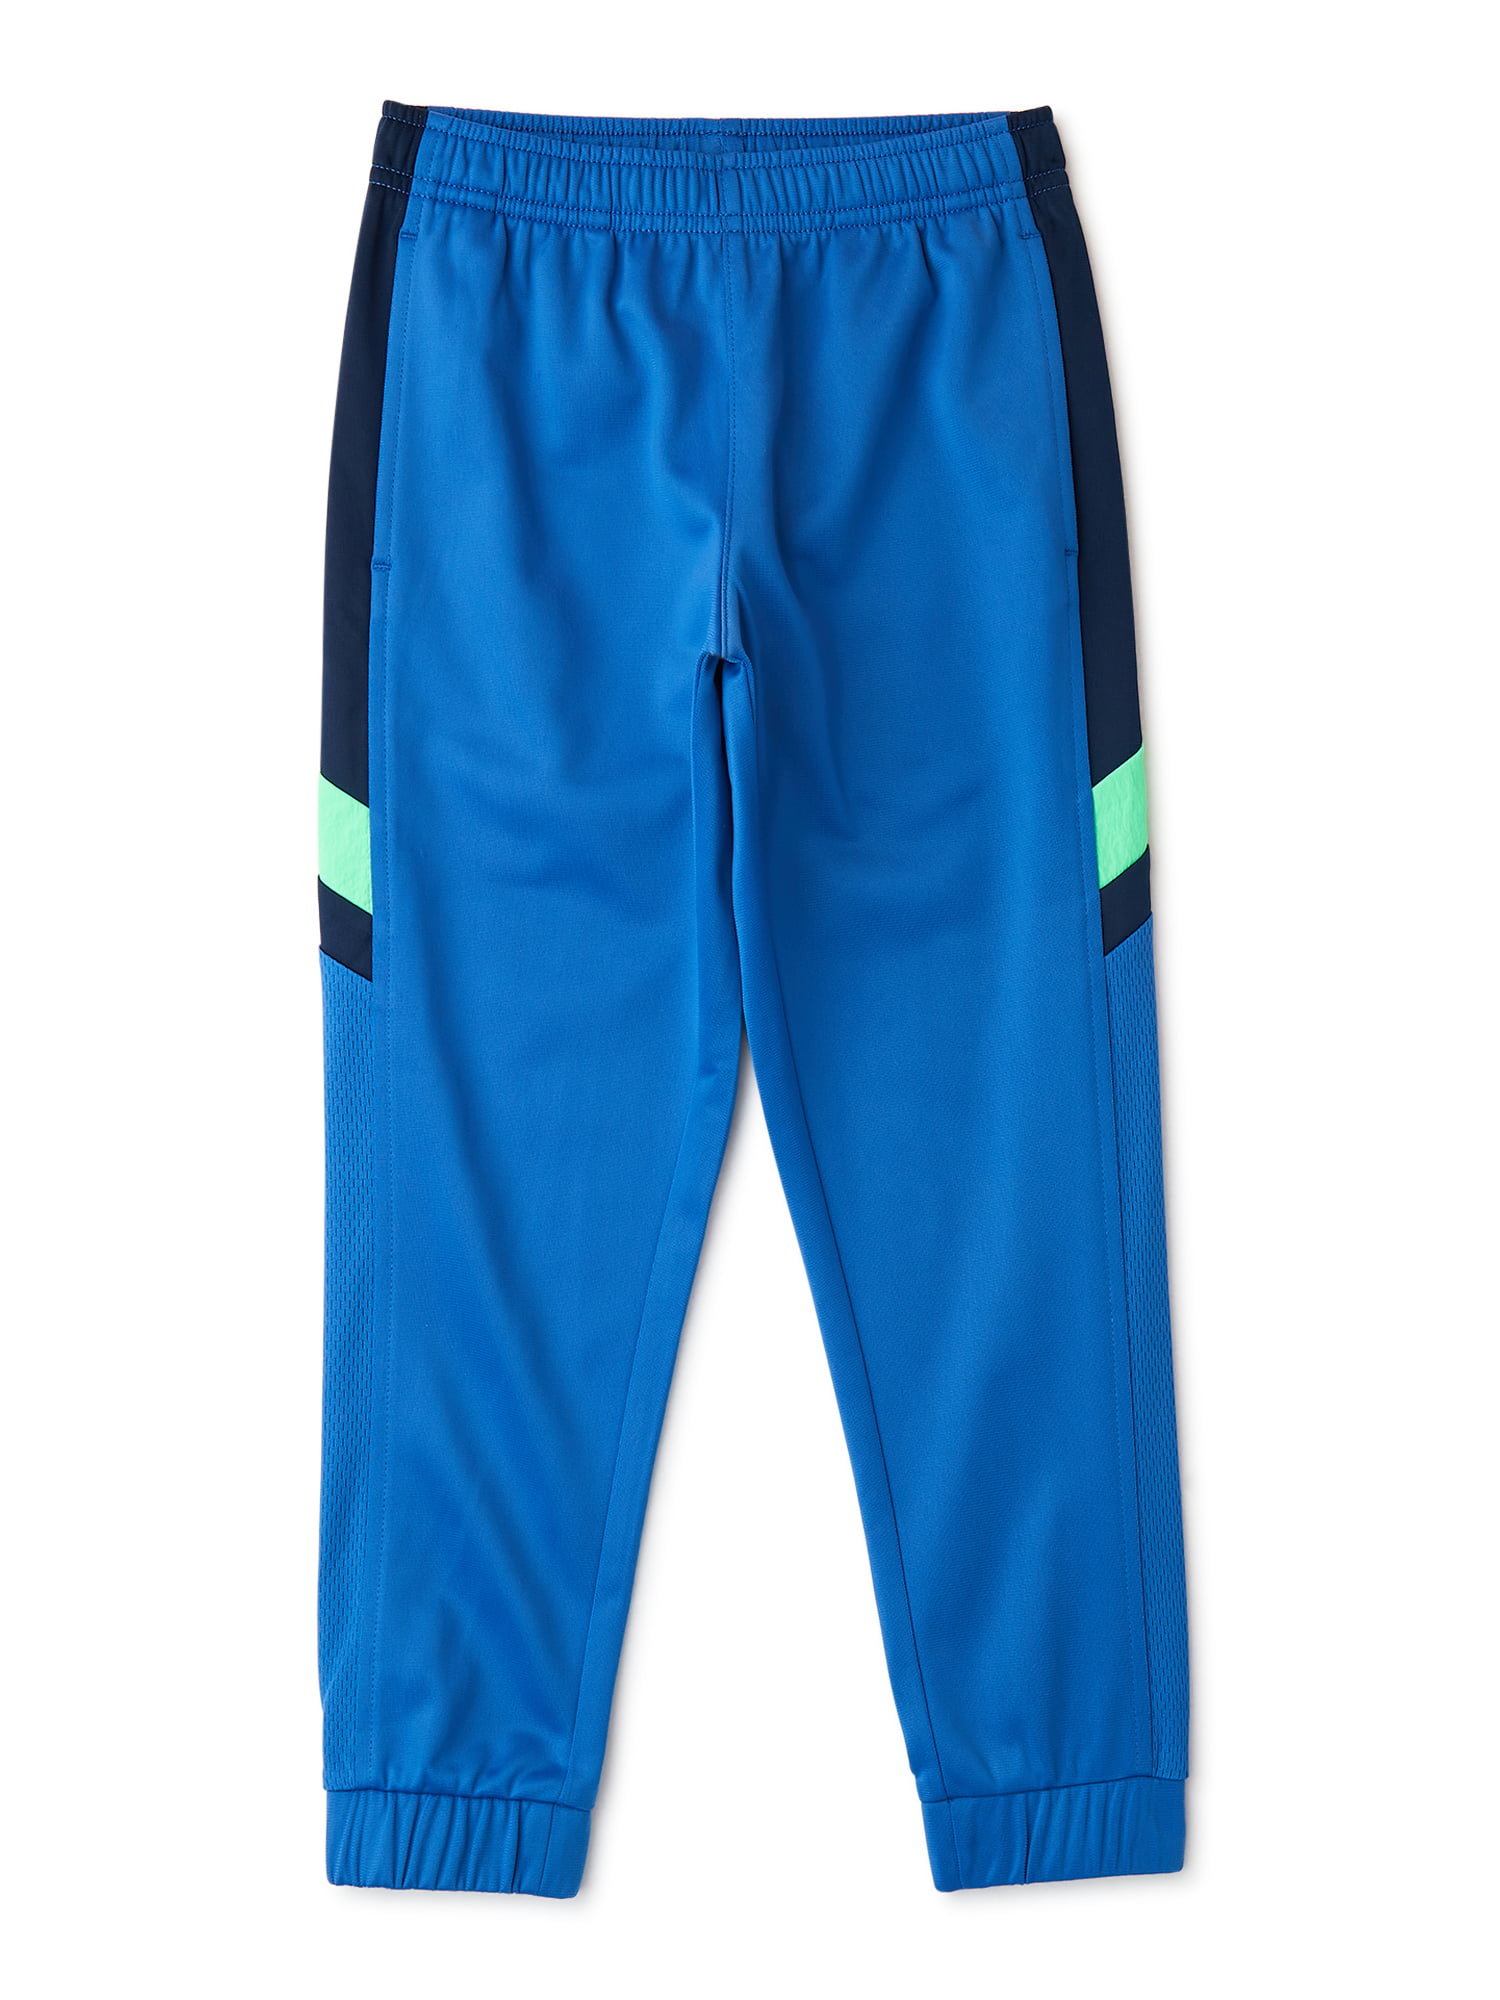 Athletic Works Boys Tricot Joggers, Sizes 4-18 & Husky